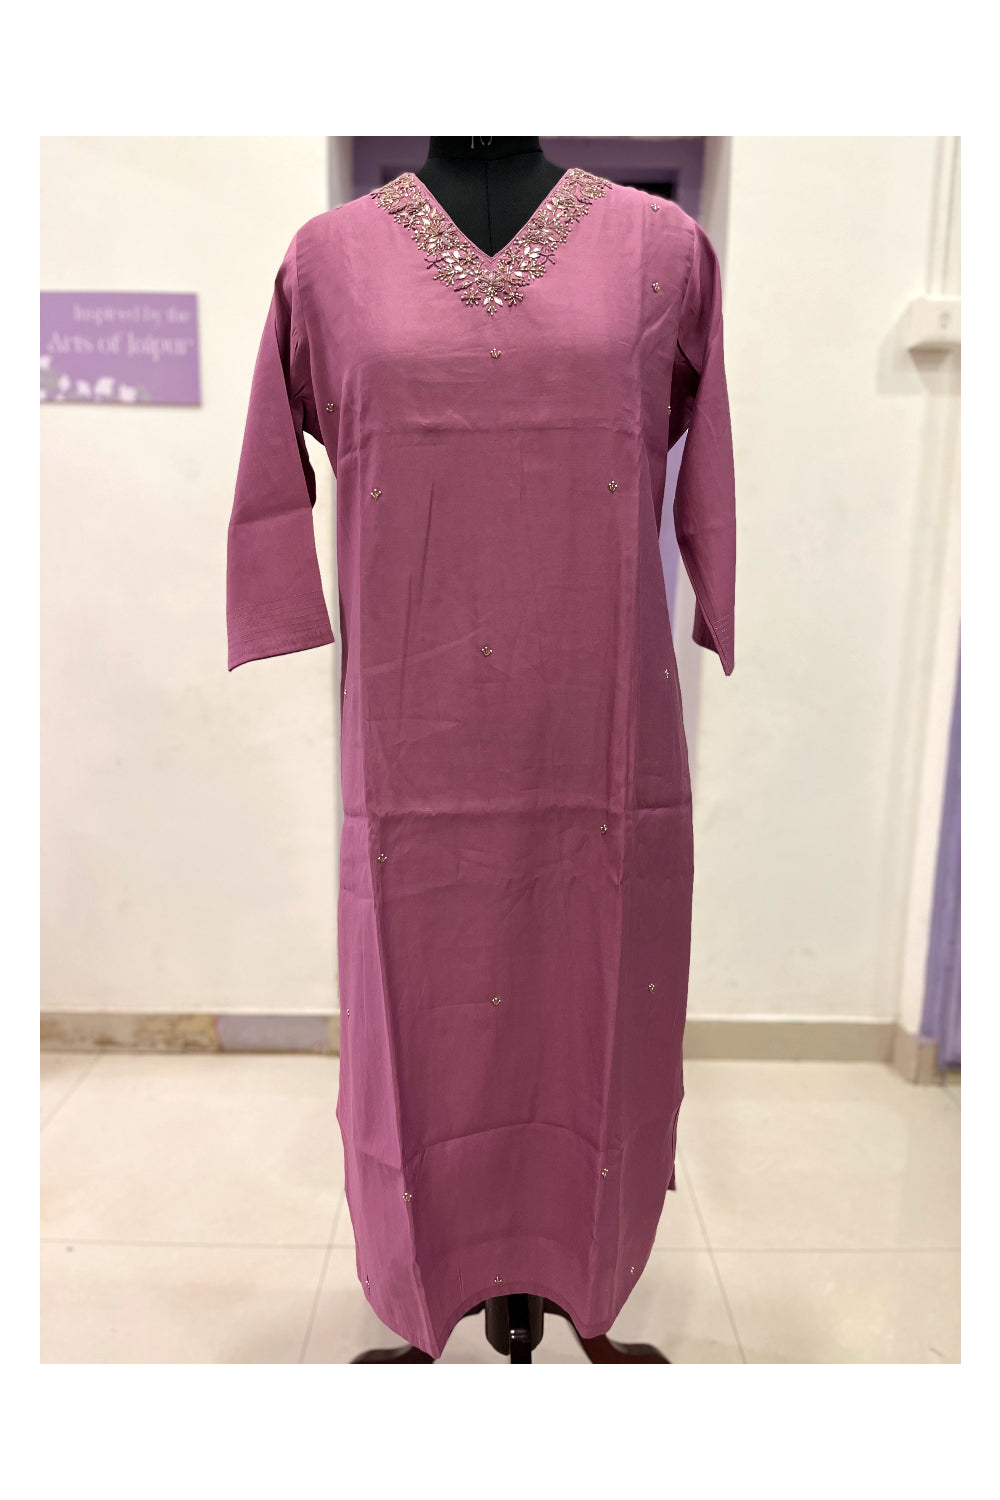 Southloom Stitched Semi Silk Lilac Salwar Set with Sequins Neck